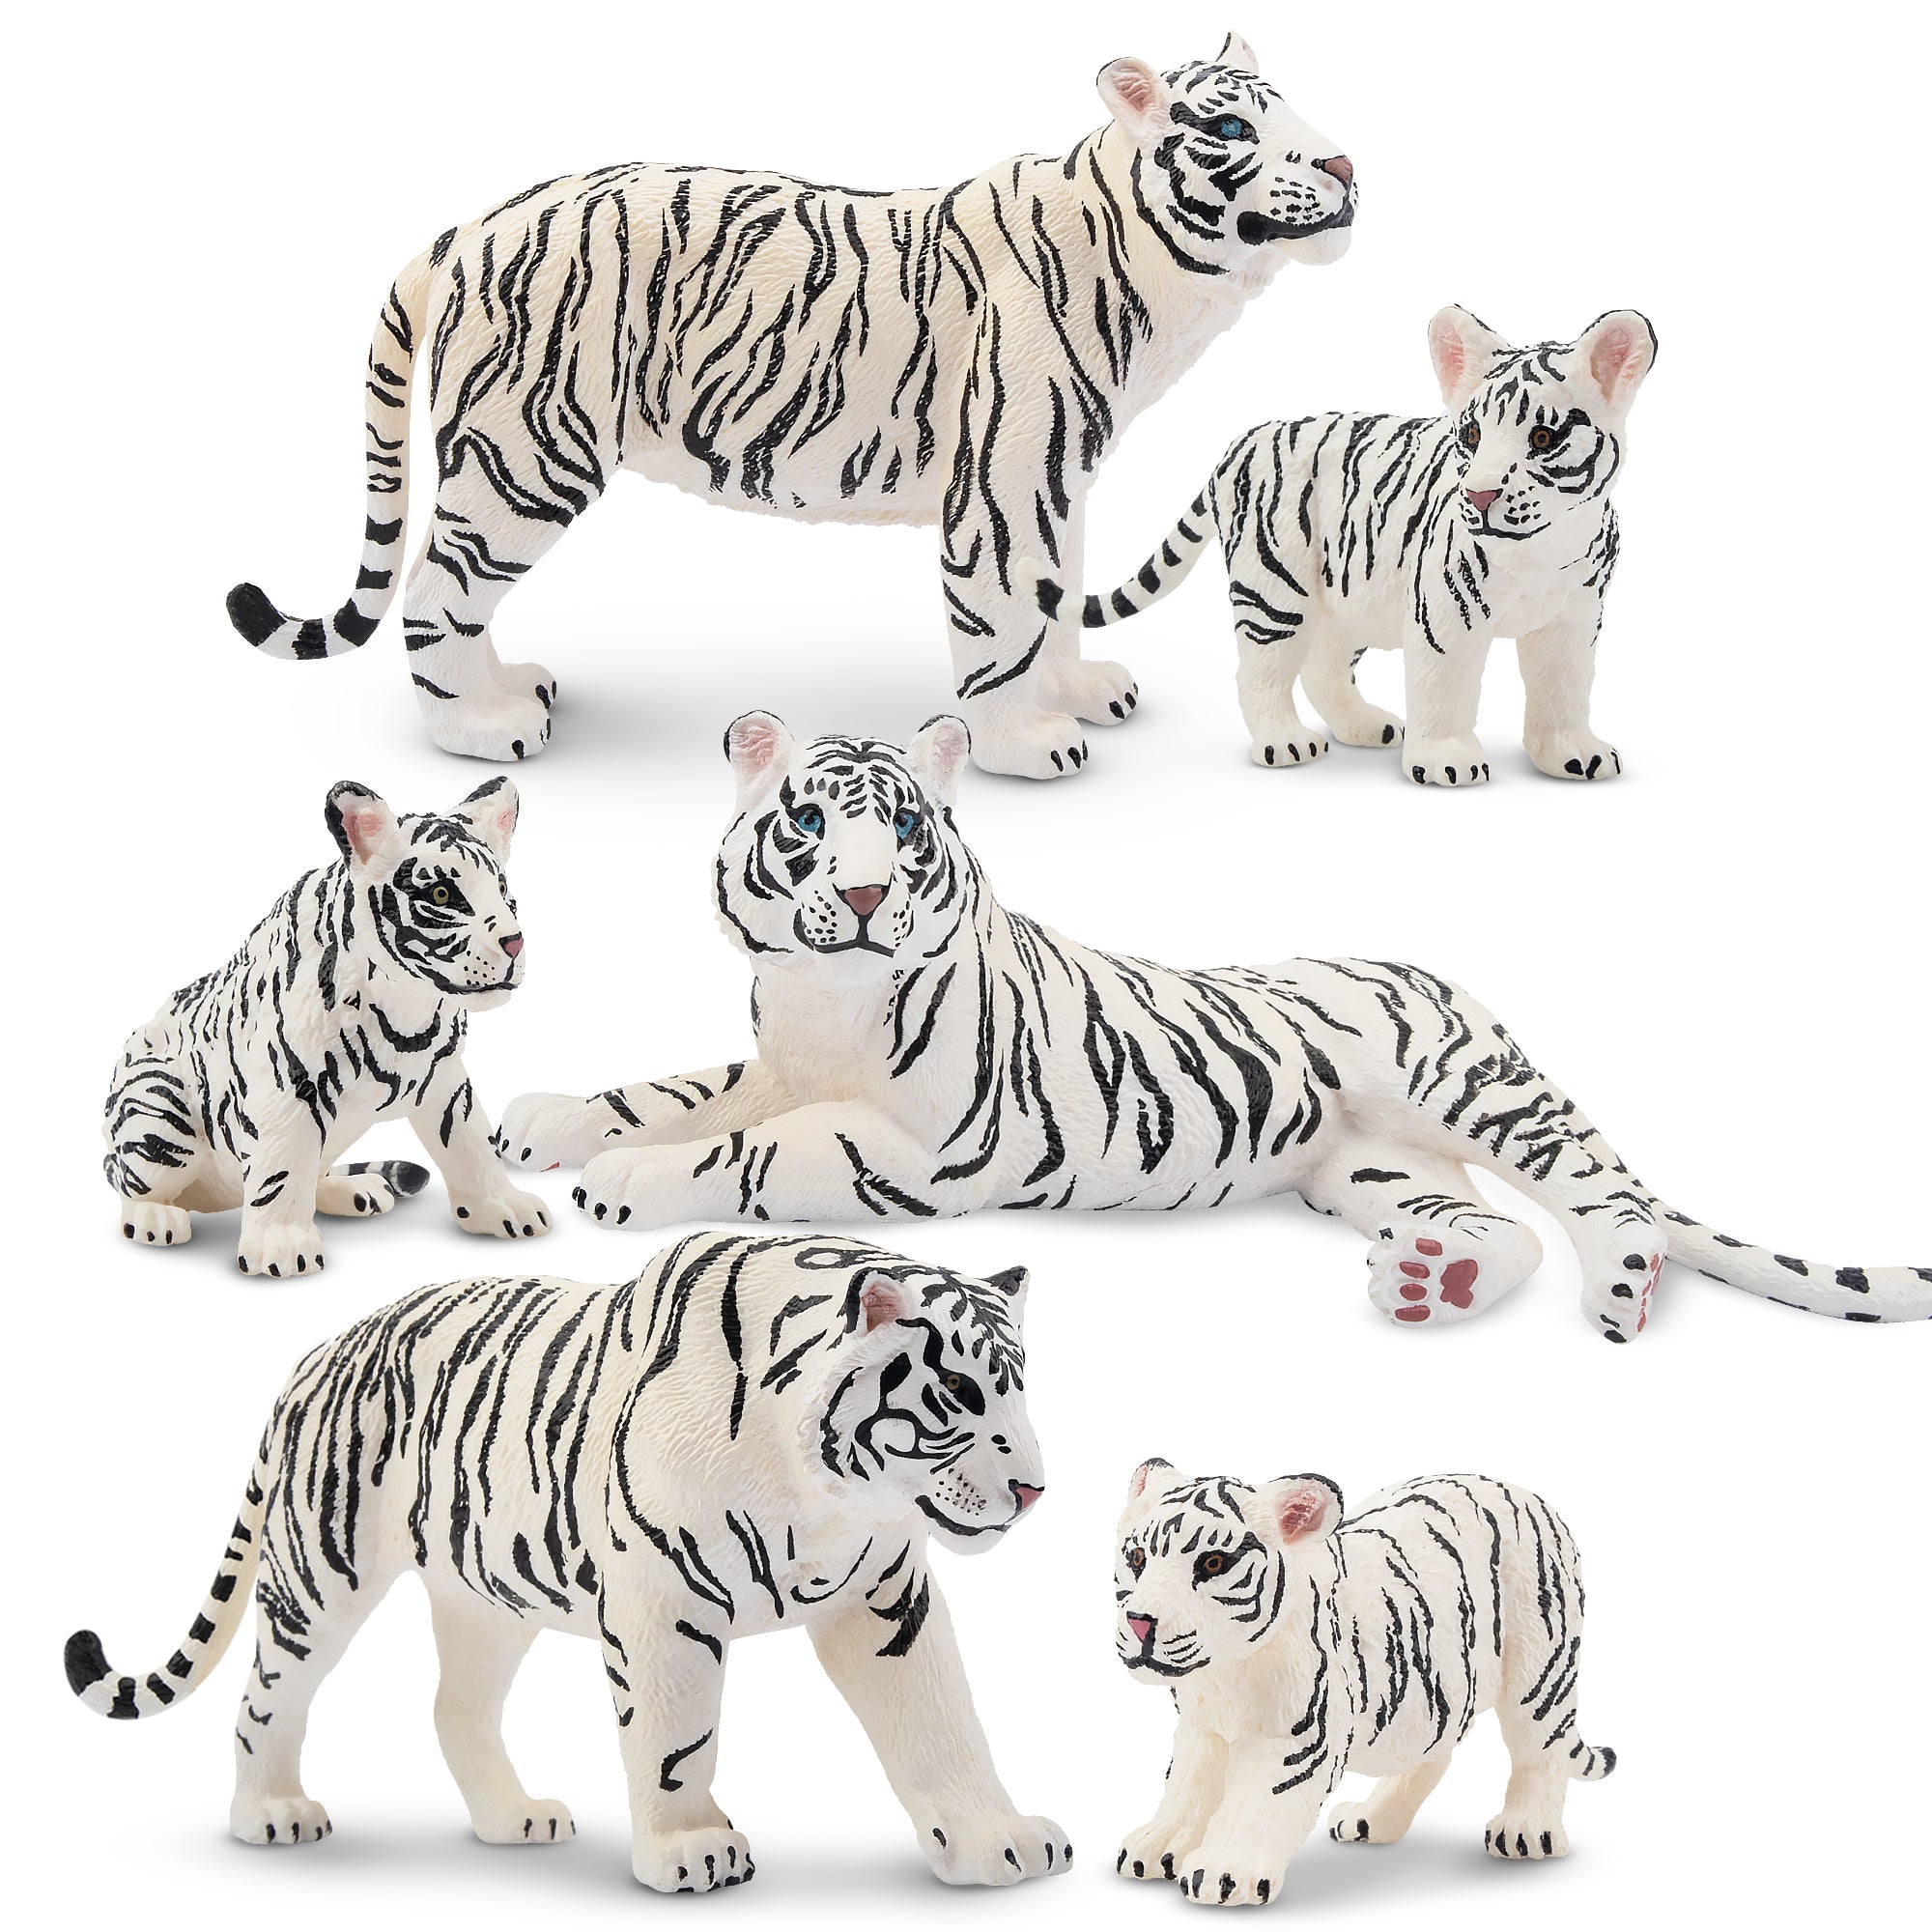 6-Piece White Tigers Family Figurines Playset